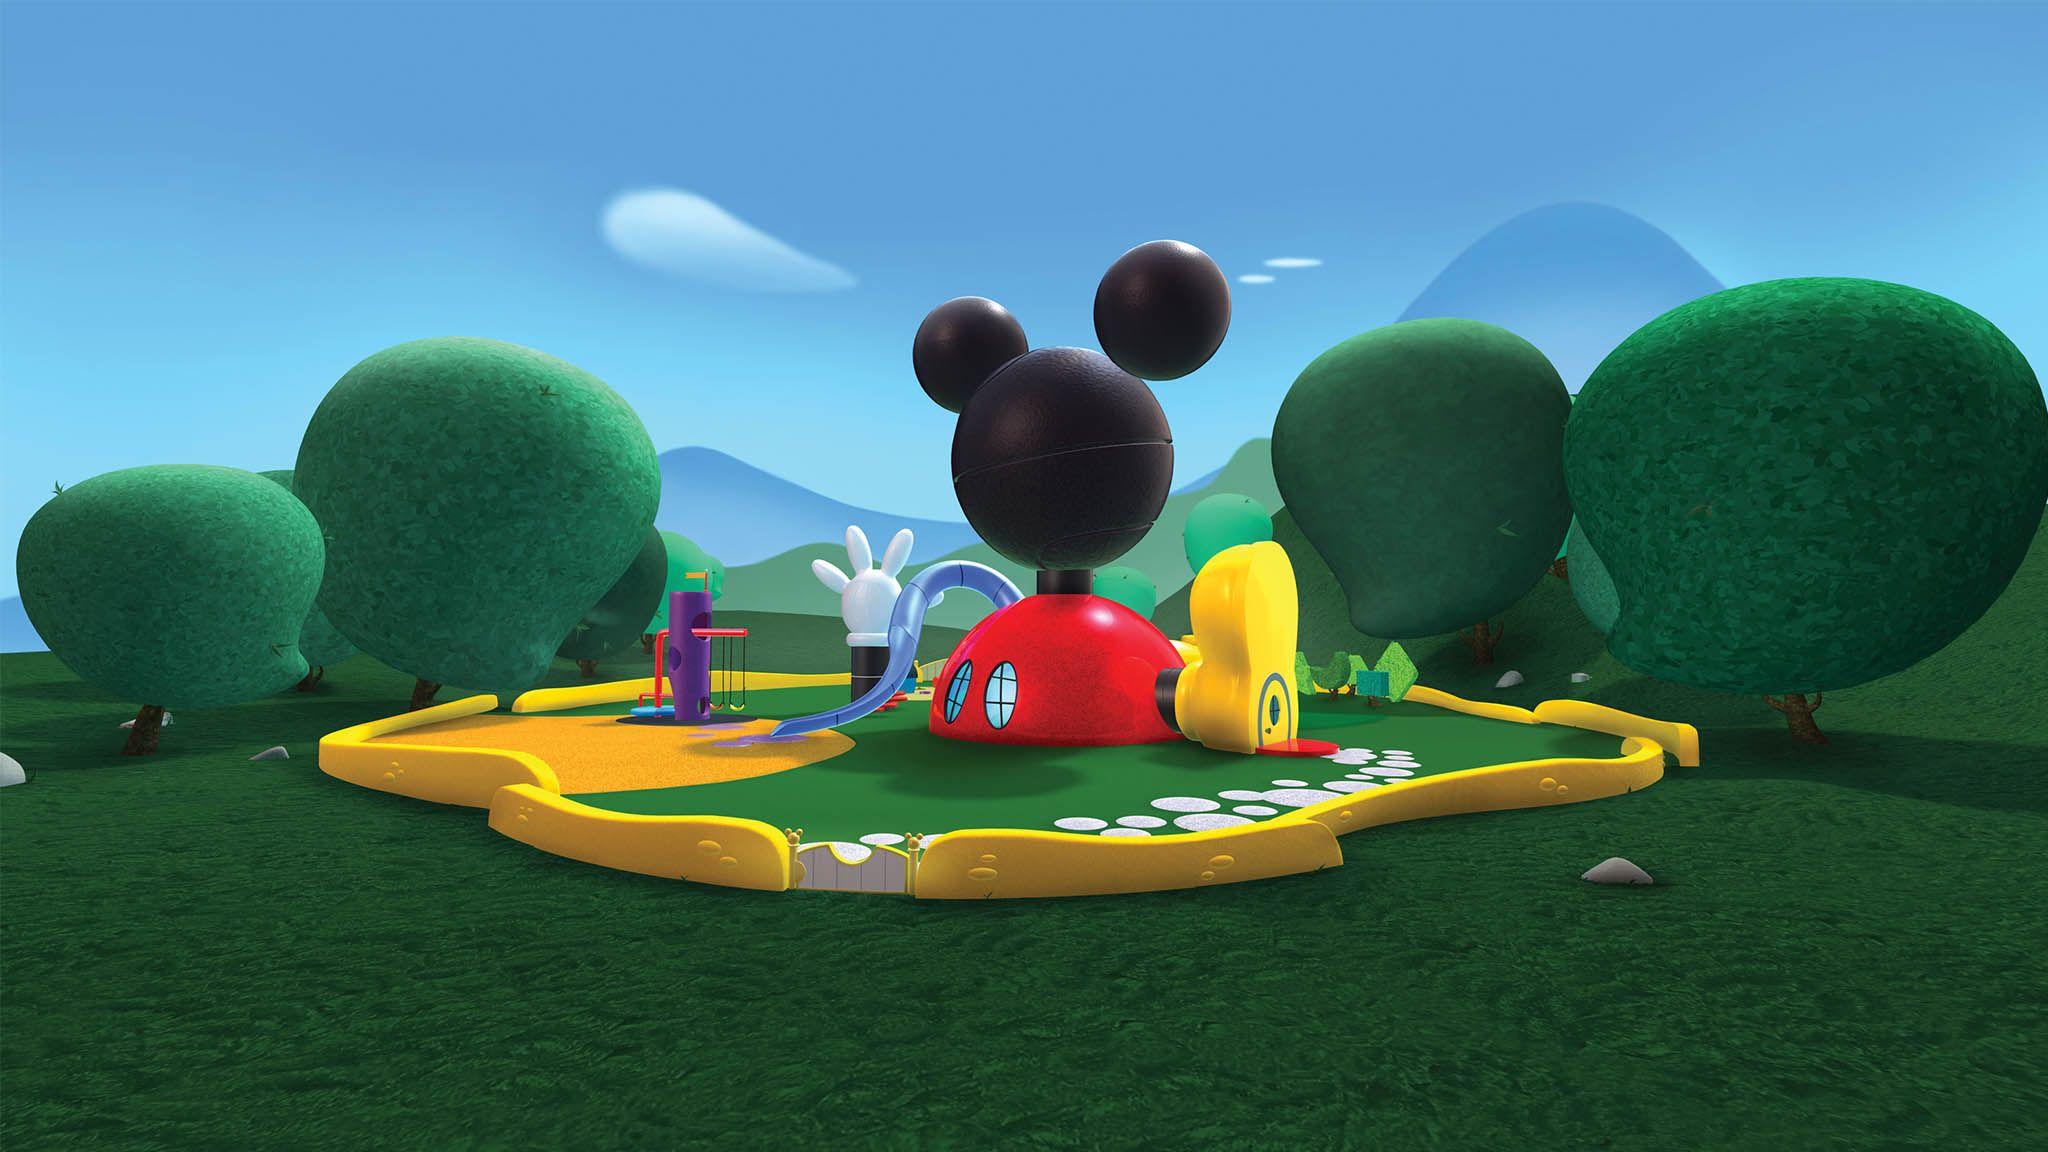 Disney Mickey Mouse Clubhouse Wallpaper Hd Picture Image